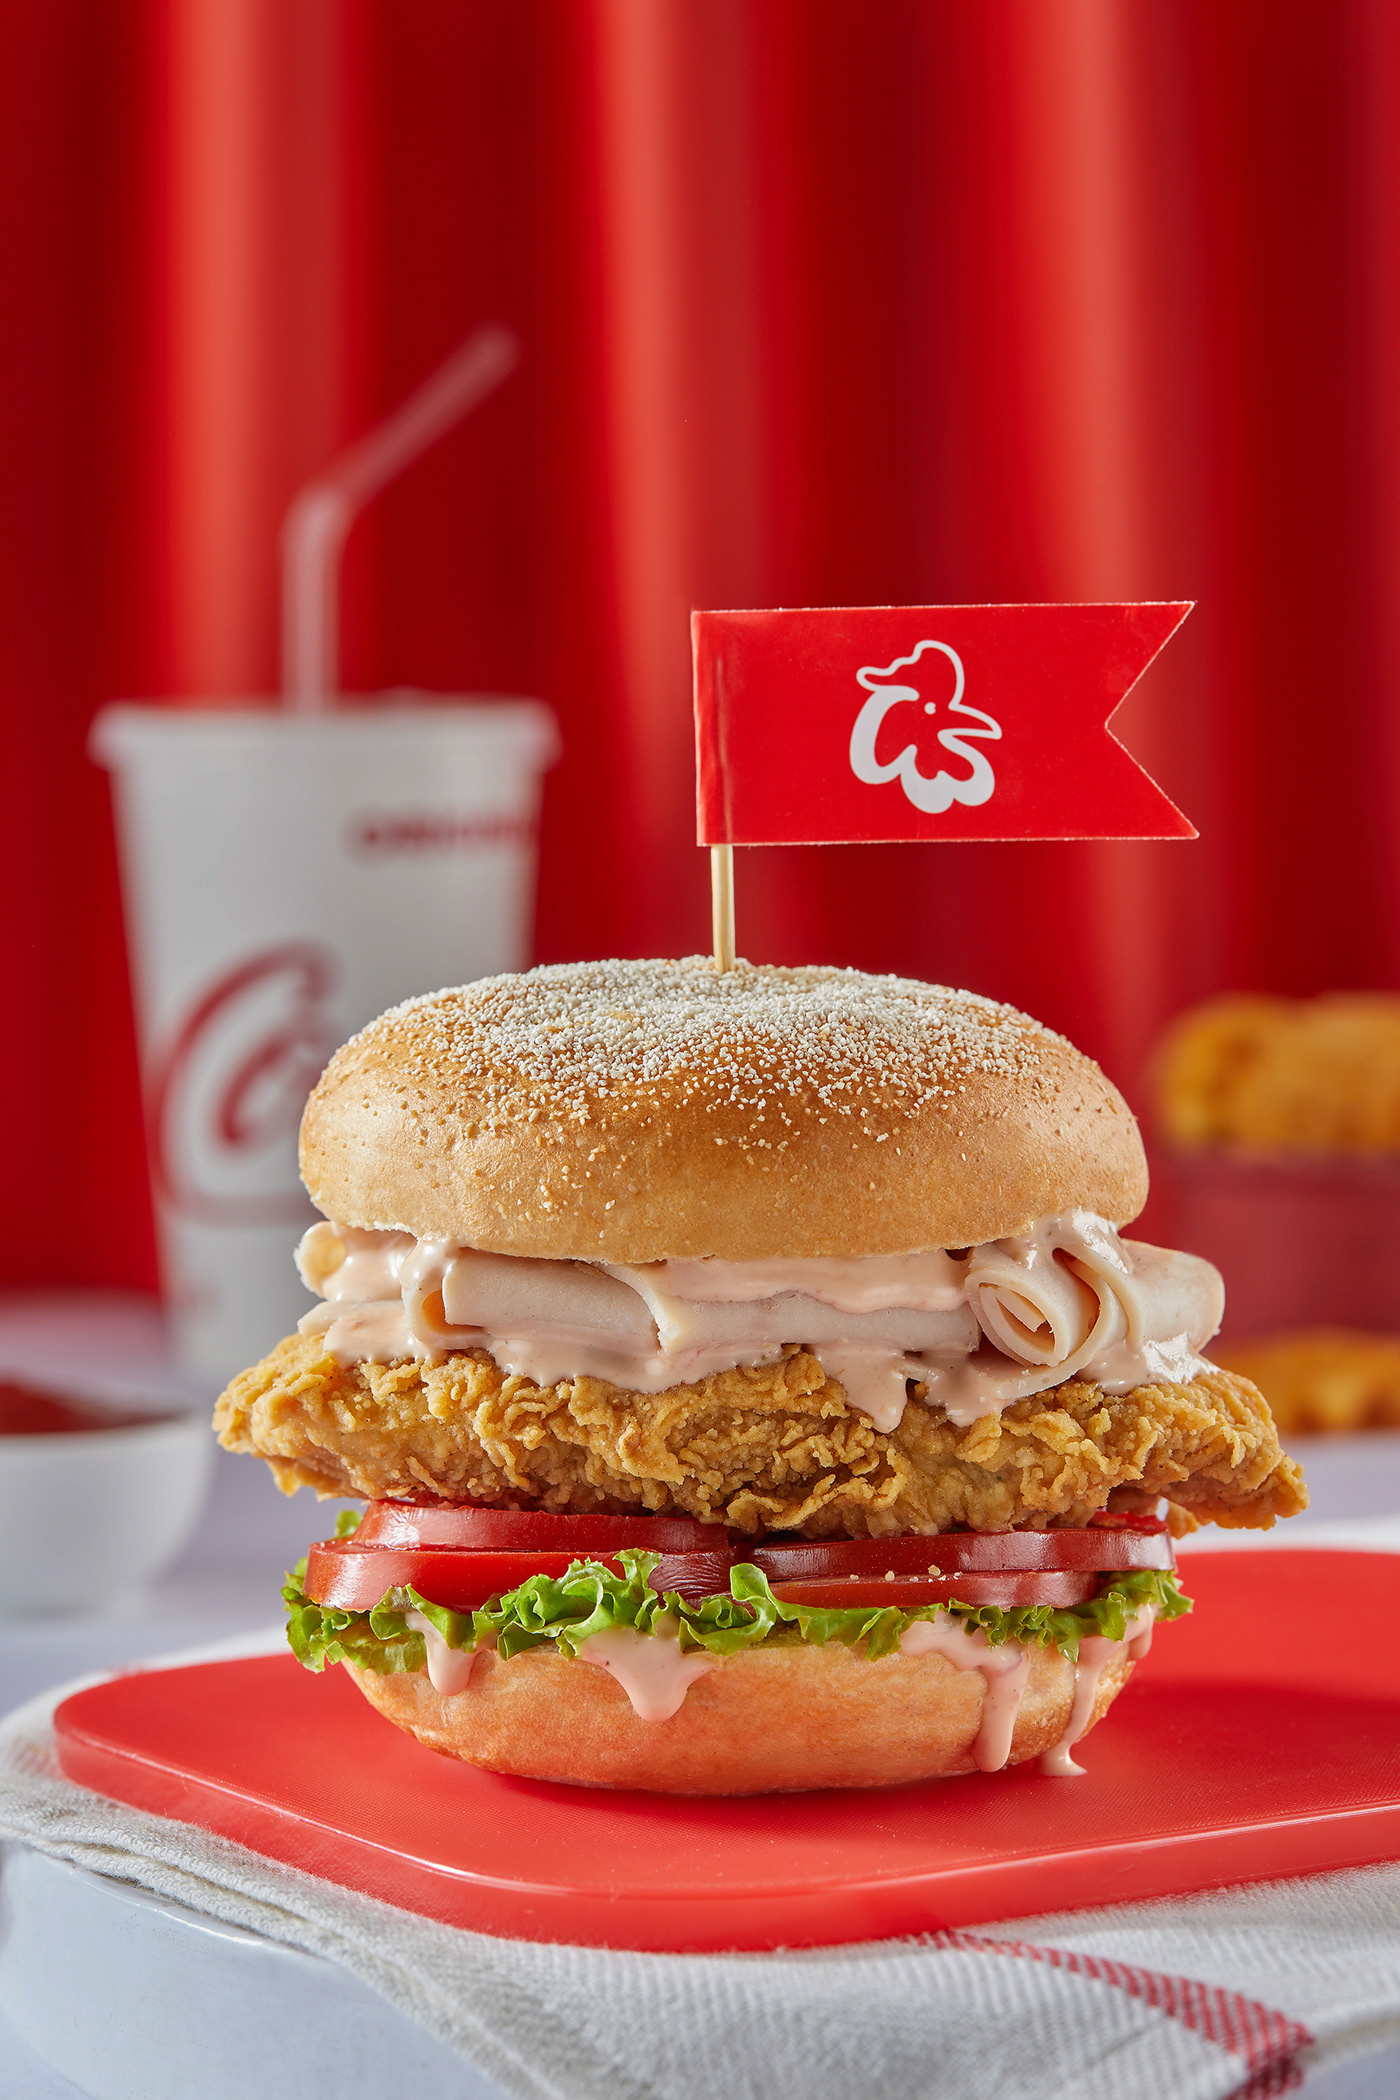 chicken friedchicken foodphotography foodstyling ArtDirection redcolor Sandwiches burger